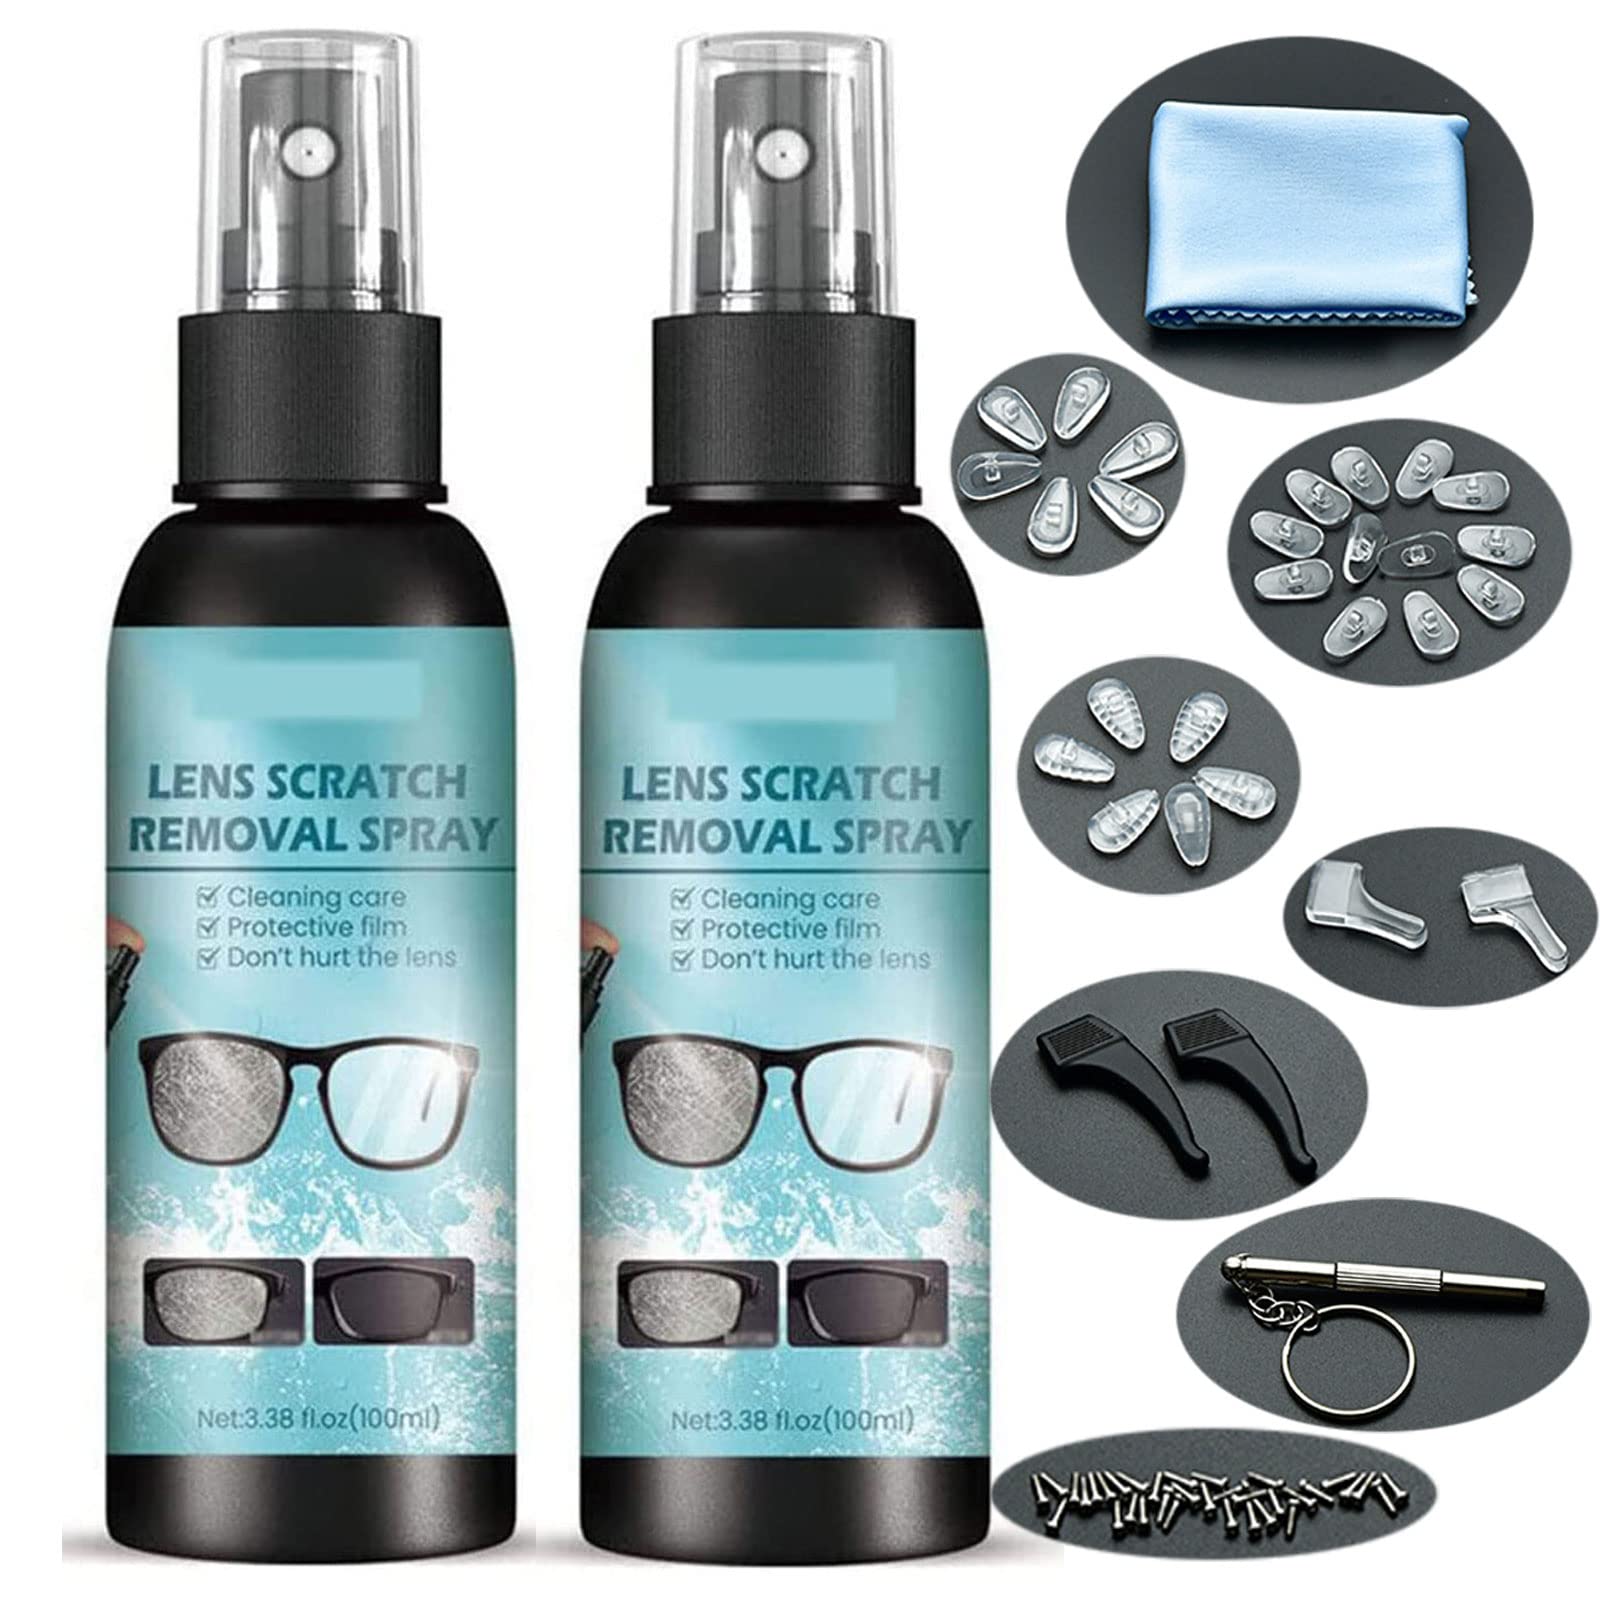  ALBRAZ 2023 New Lens Scratch Removal Spray, Scratch Remover for  Sunglasses, Lens Scratch Remover for Glasses, Glasses Lens Cleaning Spray  for Sunglasses Screen Cleaning Tool- 2PCS-c2 : Health & Household